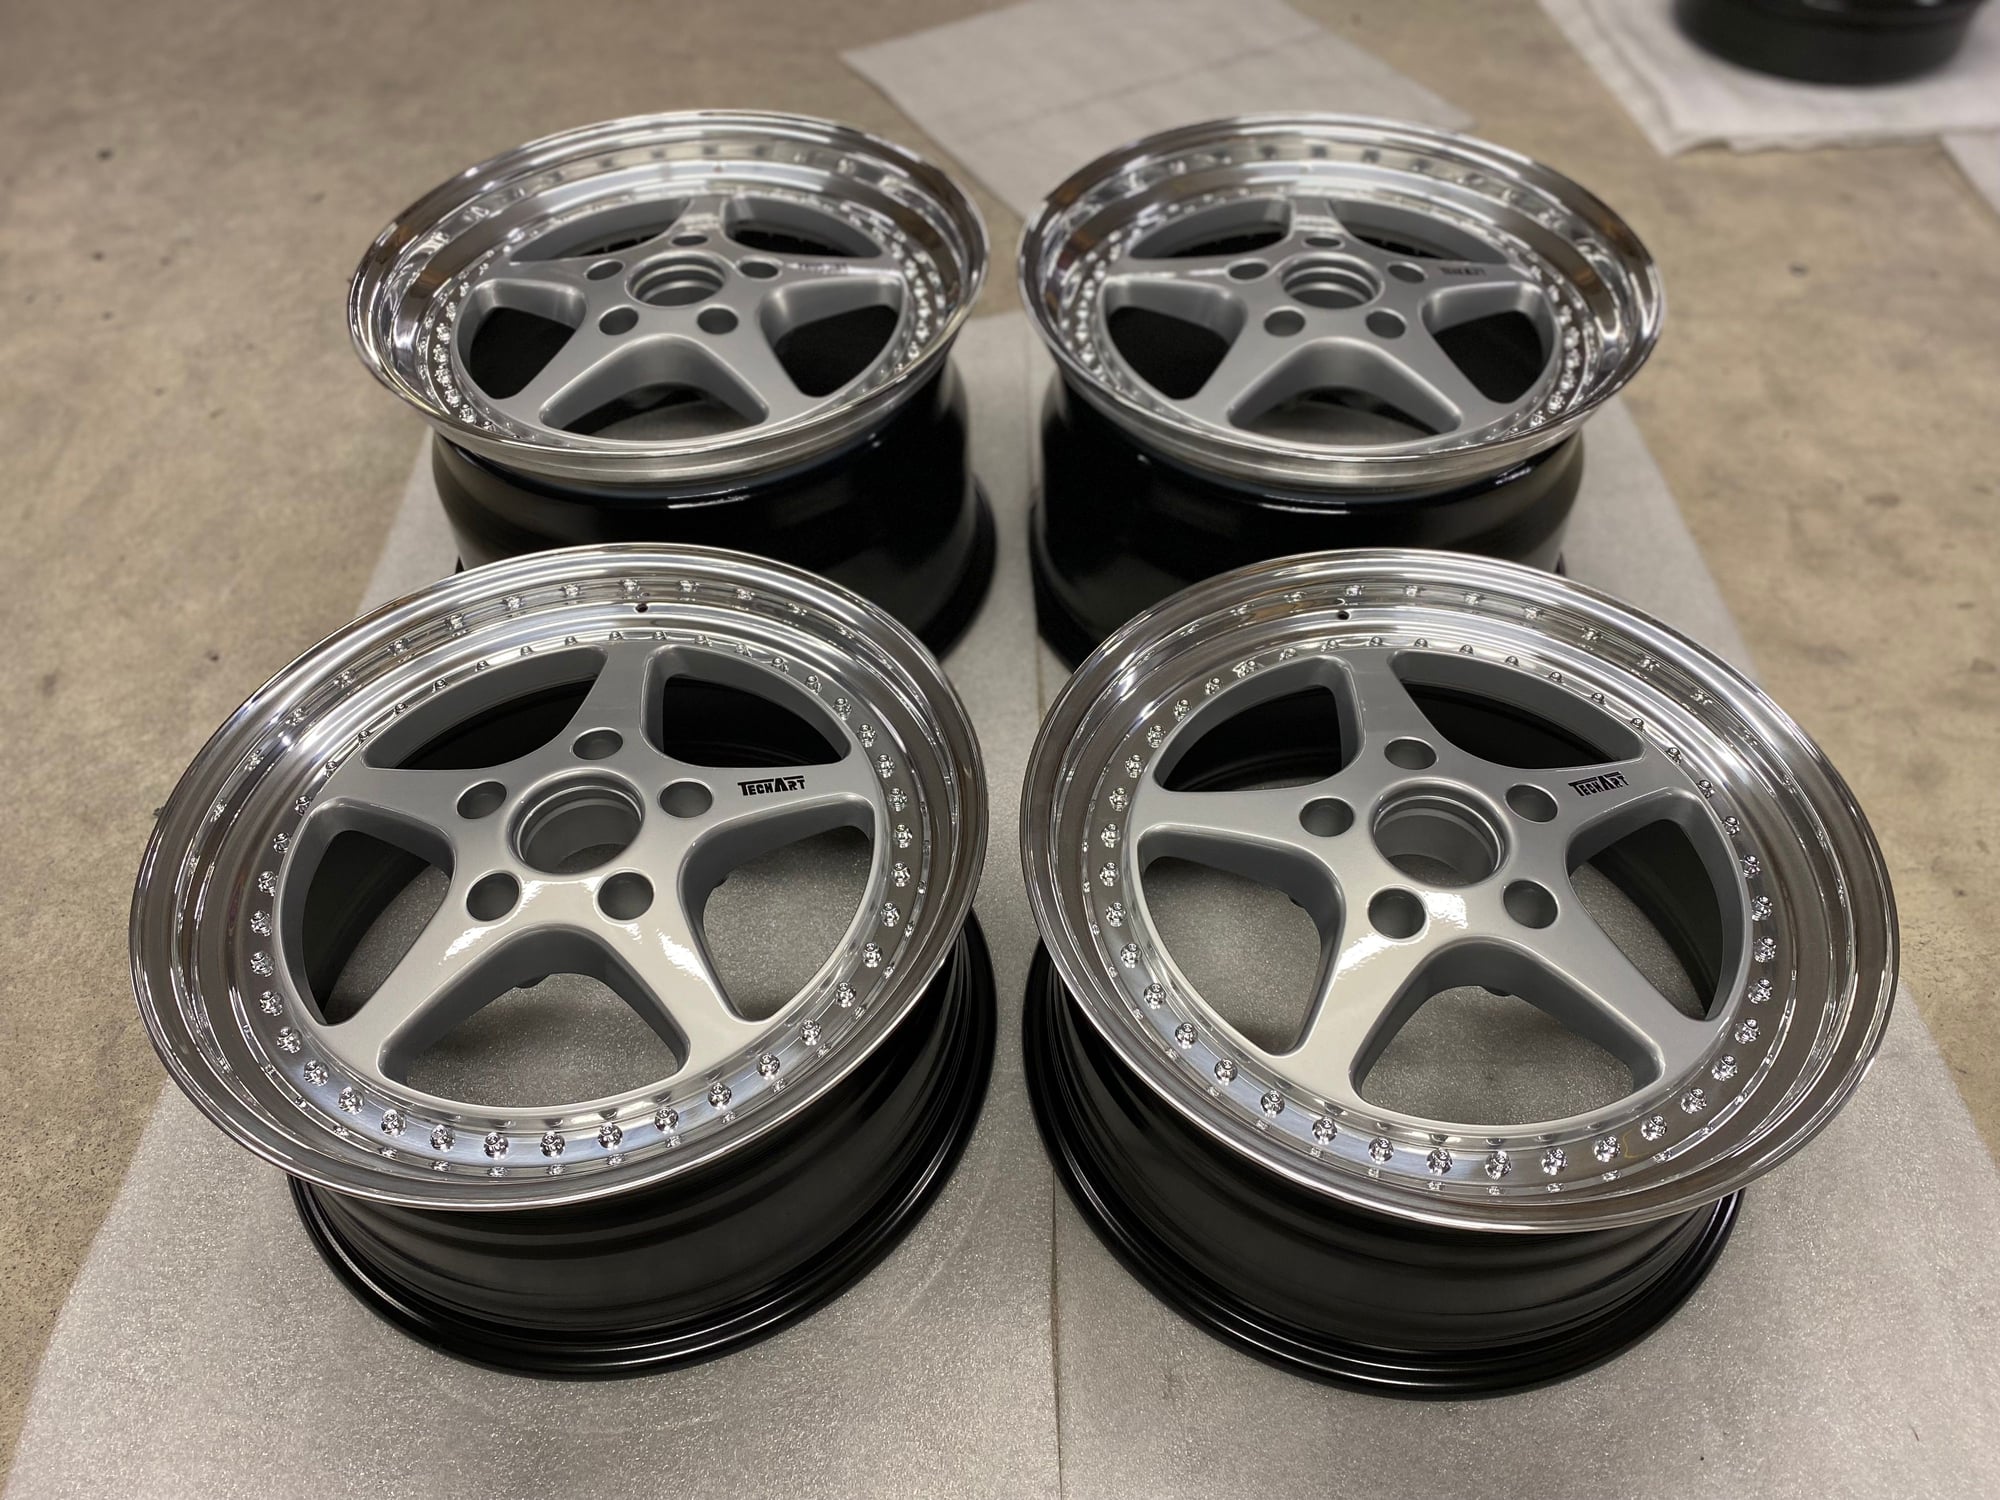 Wheels and Tires/Axles - Techart Championship Formula Wheel set 18 x 8.5 / 11 for NB 993 - Mint Condition! - New - 1995 to 1998 Porsche 911 - Dundalk, MD 21222, United States